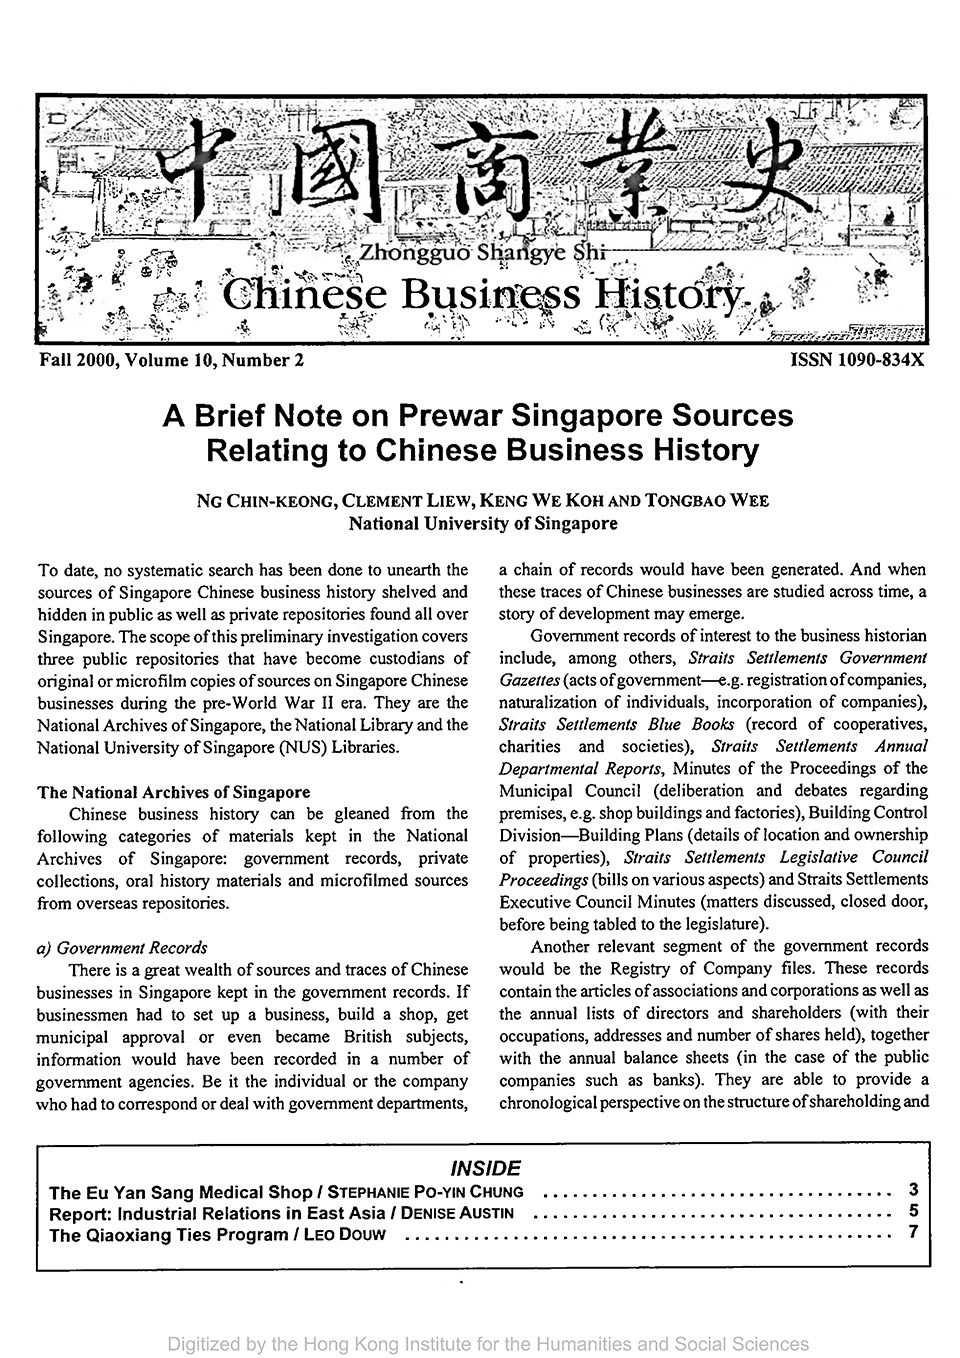 Cover of Chinese Business History Journal Volume 10, Number 2